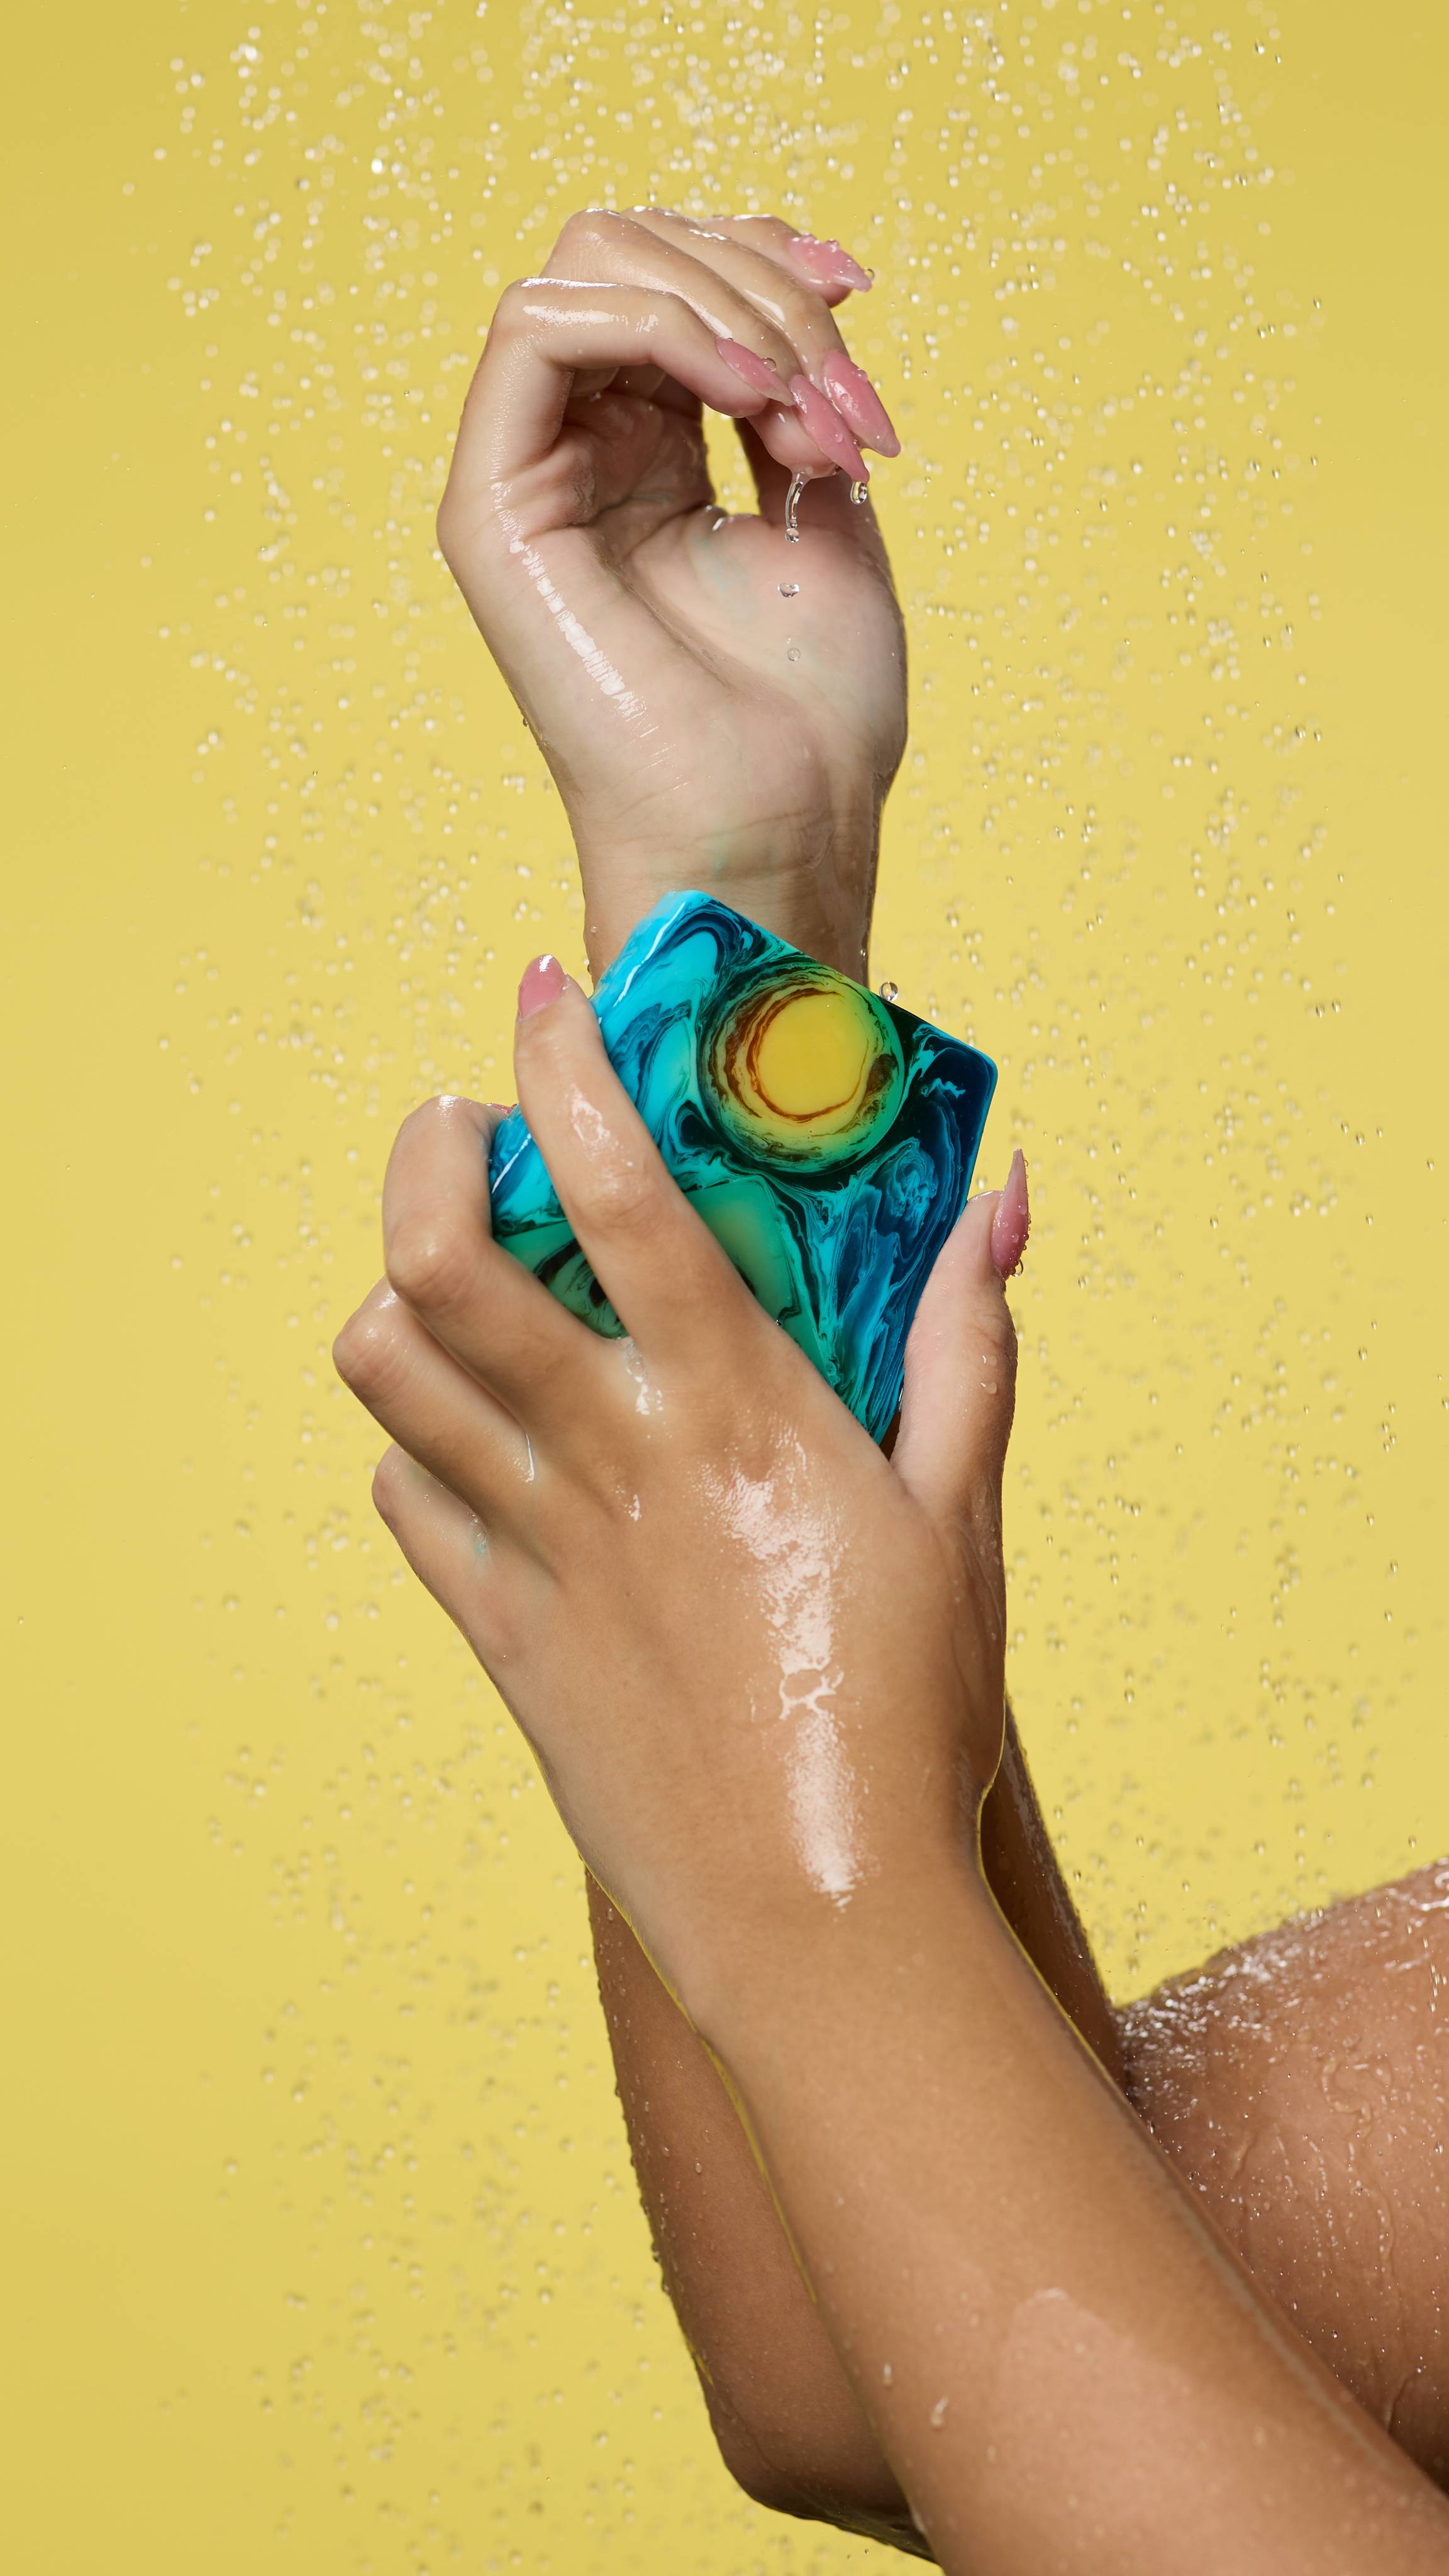 A shot of the model's arms on a yellow background as water is falling. They use one hand to smooth the soap over their forearm.